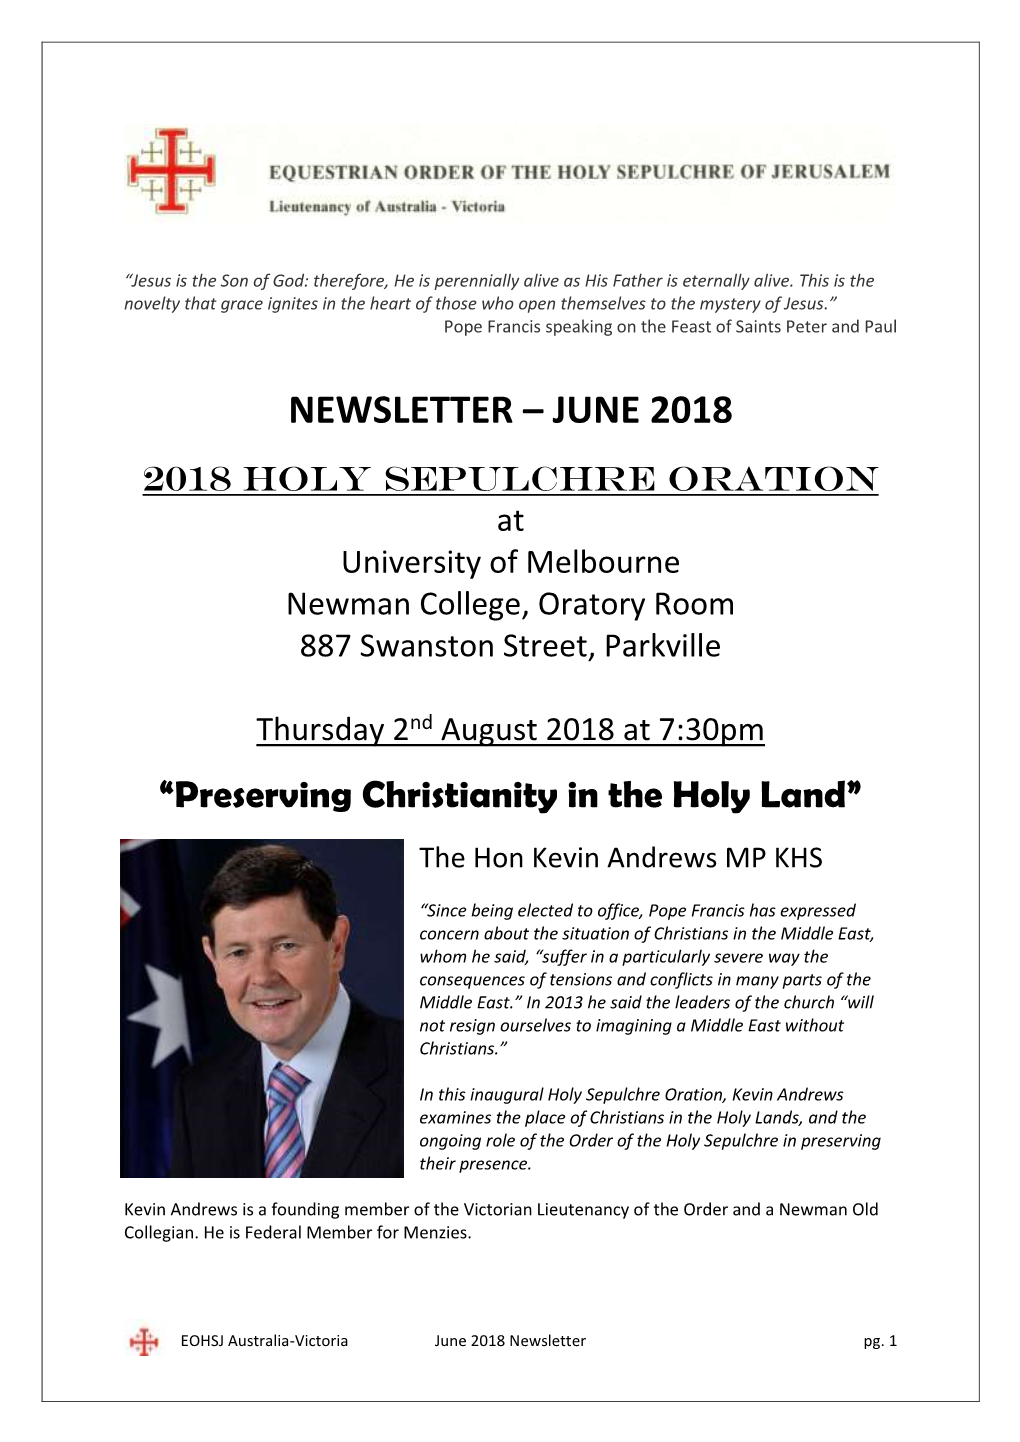 NEWSLETTER – JUNE 2018 2018 HOLY SEPULCHRE ORATION at University of Melbourne Newman College, Oratory Room 887 Swanston Street, Parkville